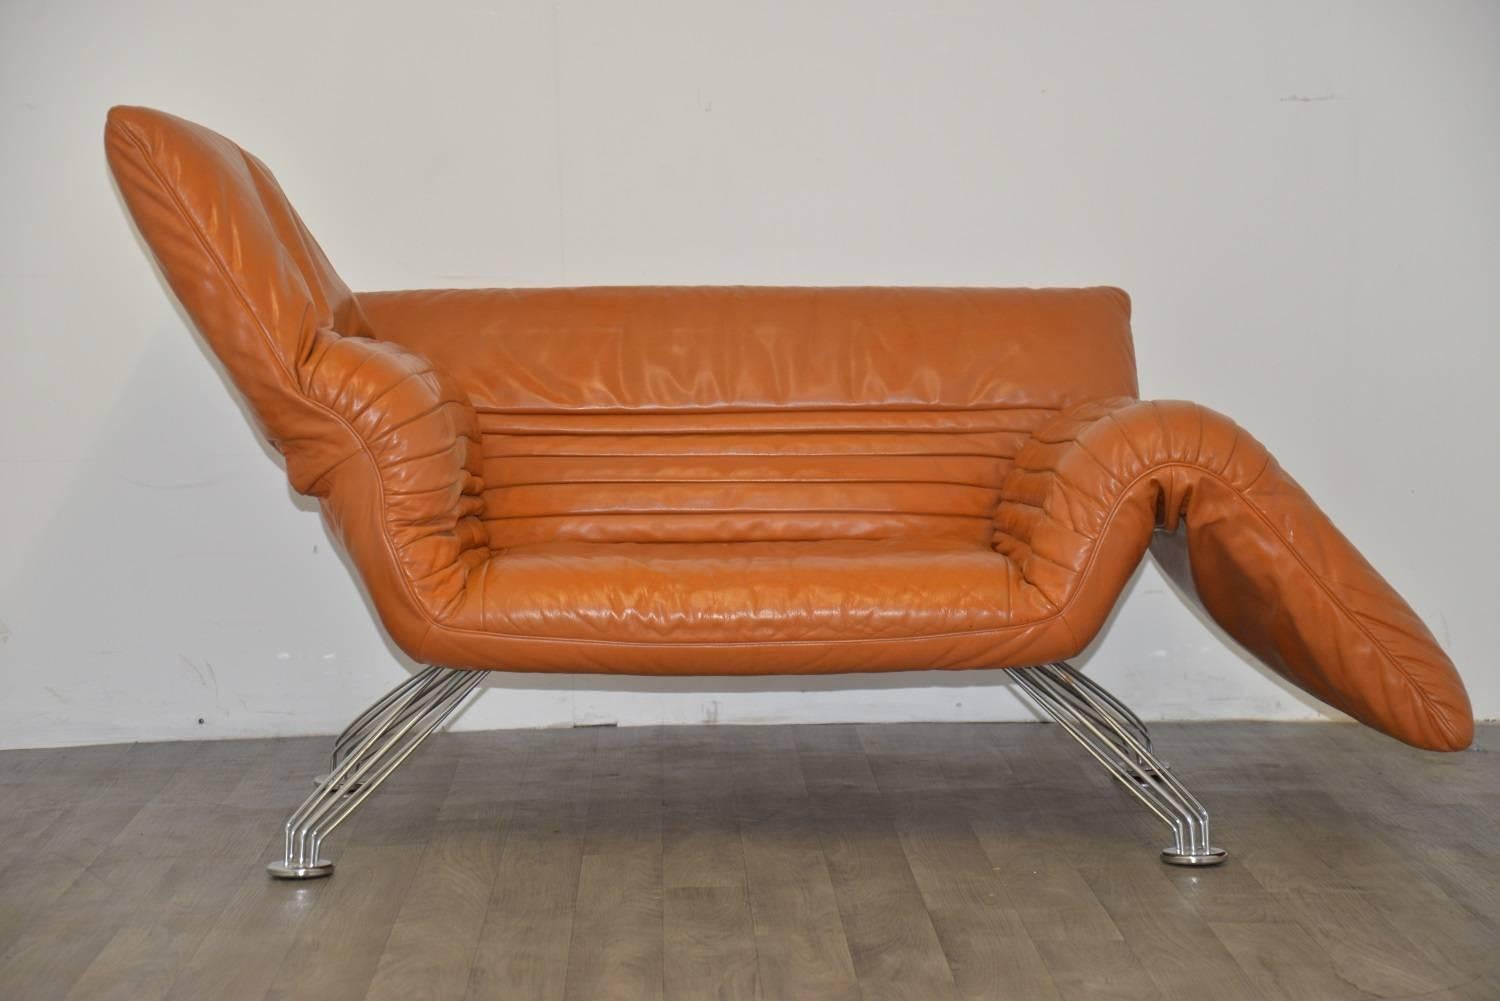 Discounted airfreight for our US and International customers (2 weeks door to door)

Ultra rare and multifunctional De Sede DS 142 sofa designed by Winfried Totzek in 1988. With Individually adjustable armrests and backrest, this makes it also